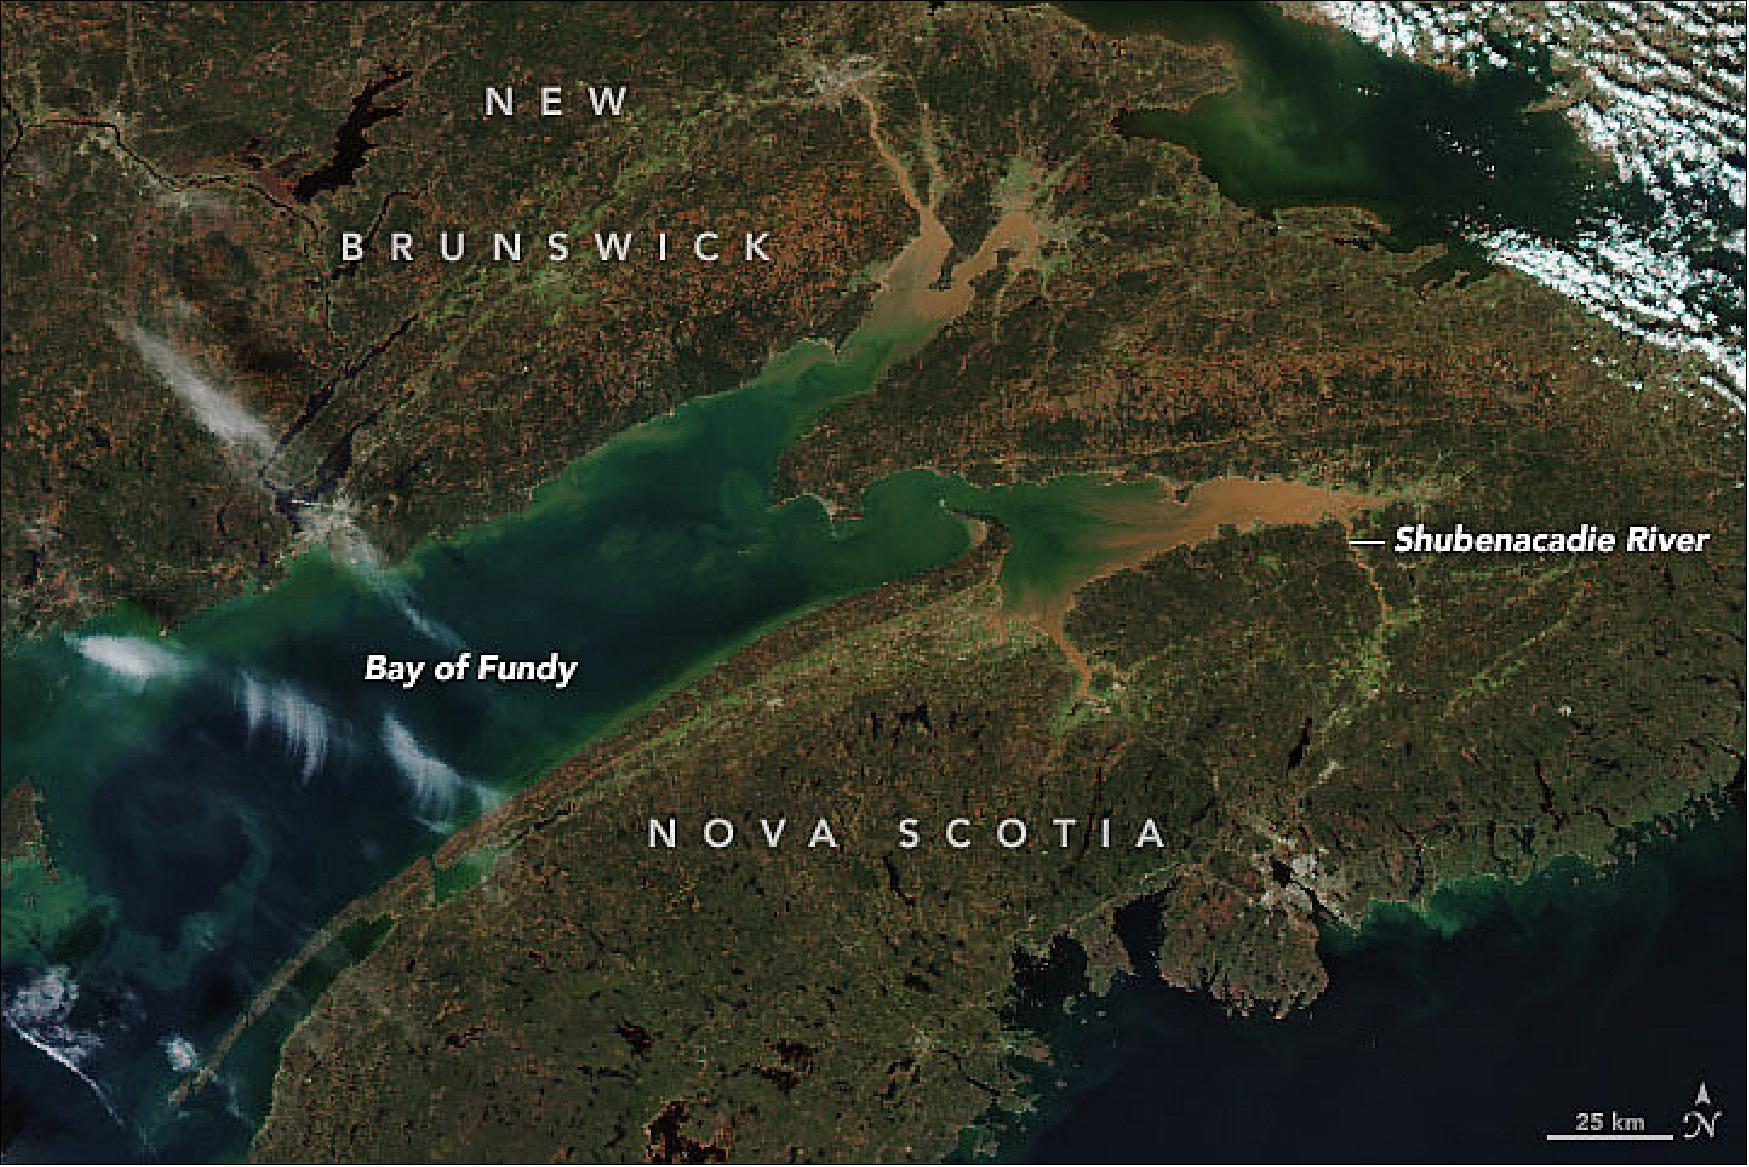 Figure 3: High tides in the funnel-shaped bay are anything but a bore when they collide with river water flowing in the opposite direction. On the afternoon of 20 October 2019, the MODIS instrument on NASA’s Aqua satellite captured this image of sediment-rich water in the Bay of Fundy, the Shubenacadie River, and other nearby waterways in far eastern Canada. On land, fall weather had transformed the foliage of hardwoods and other deciduous trees and shrubs ( image credit: NASA Earth Observatory, image by Joshua Stevens, using data from the Level 1 and Atmospheres Active Distribution System (LAADS) and Land Atmosphere Near real-time Capability for EOS (LANCE). Story by Adam Voiland)